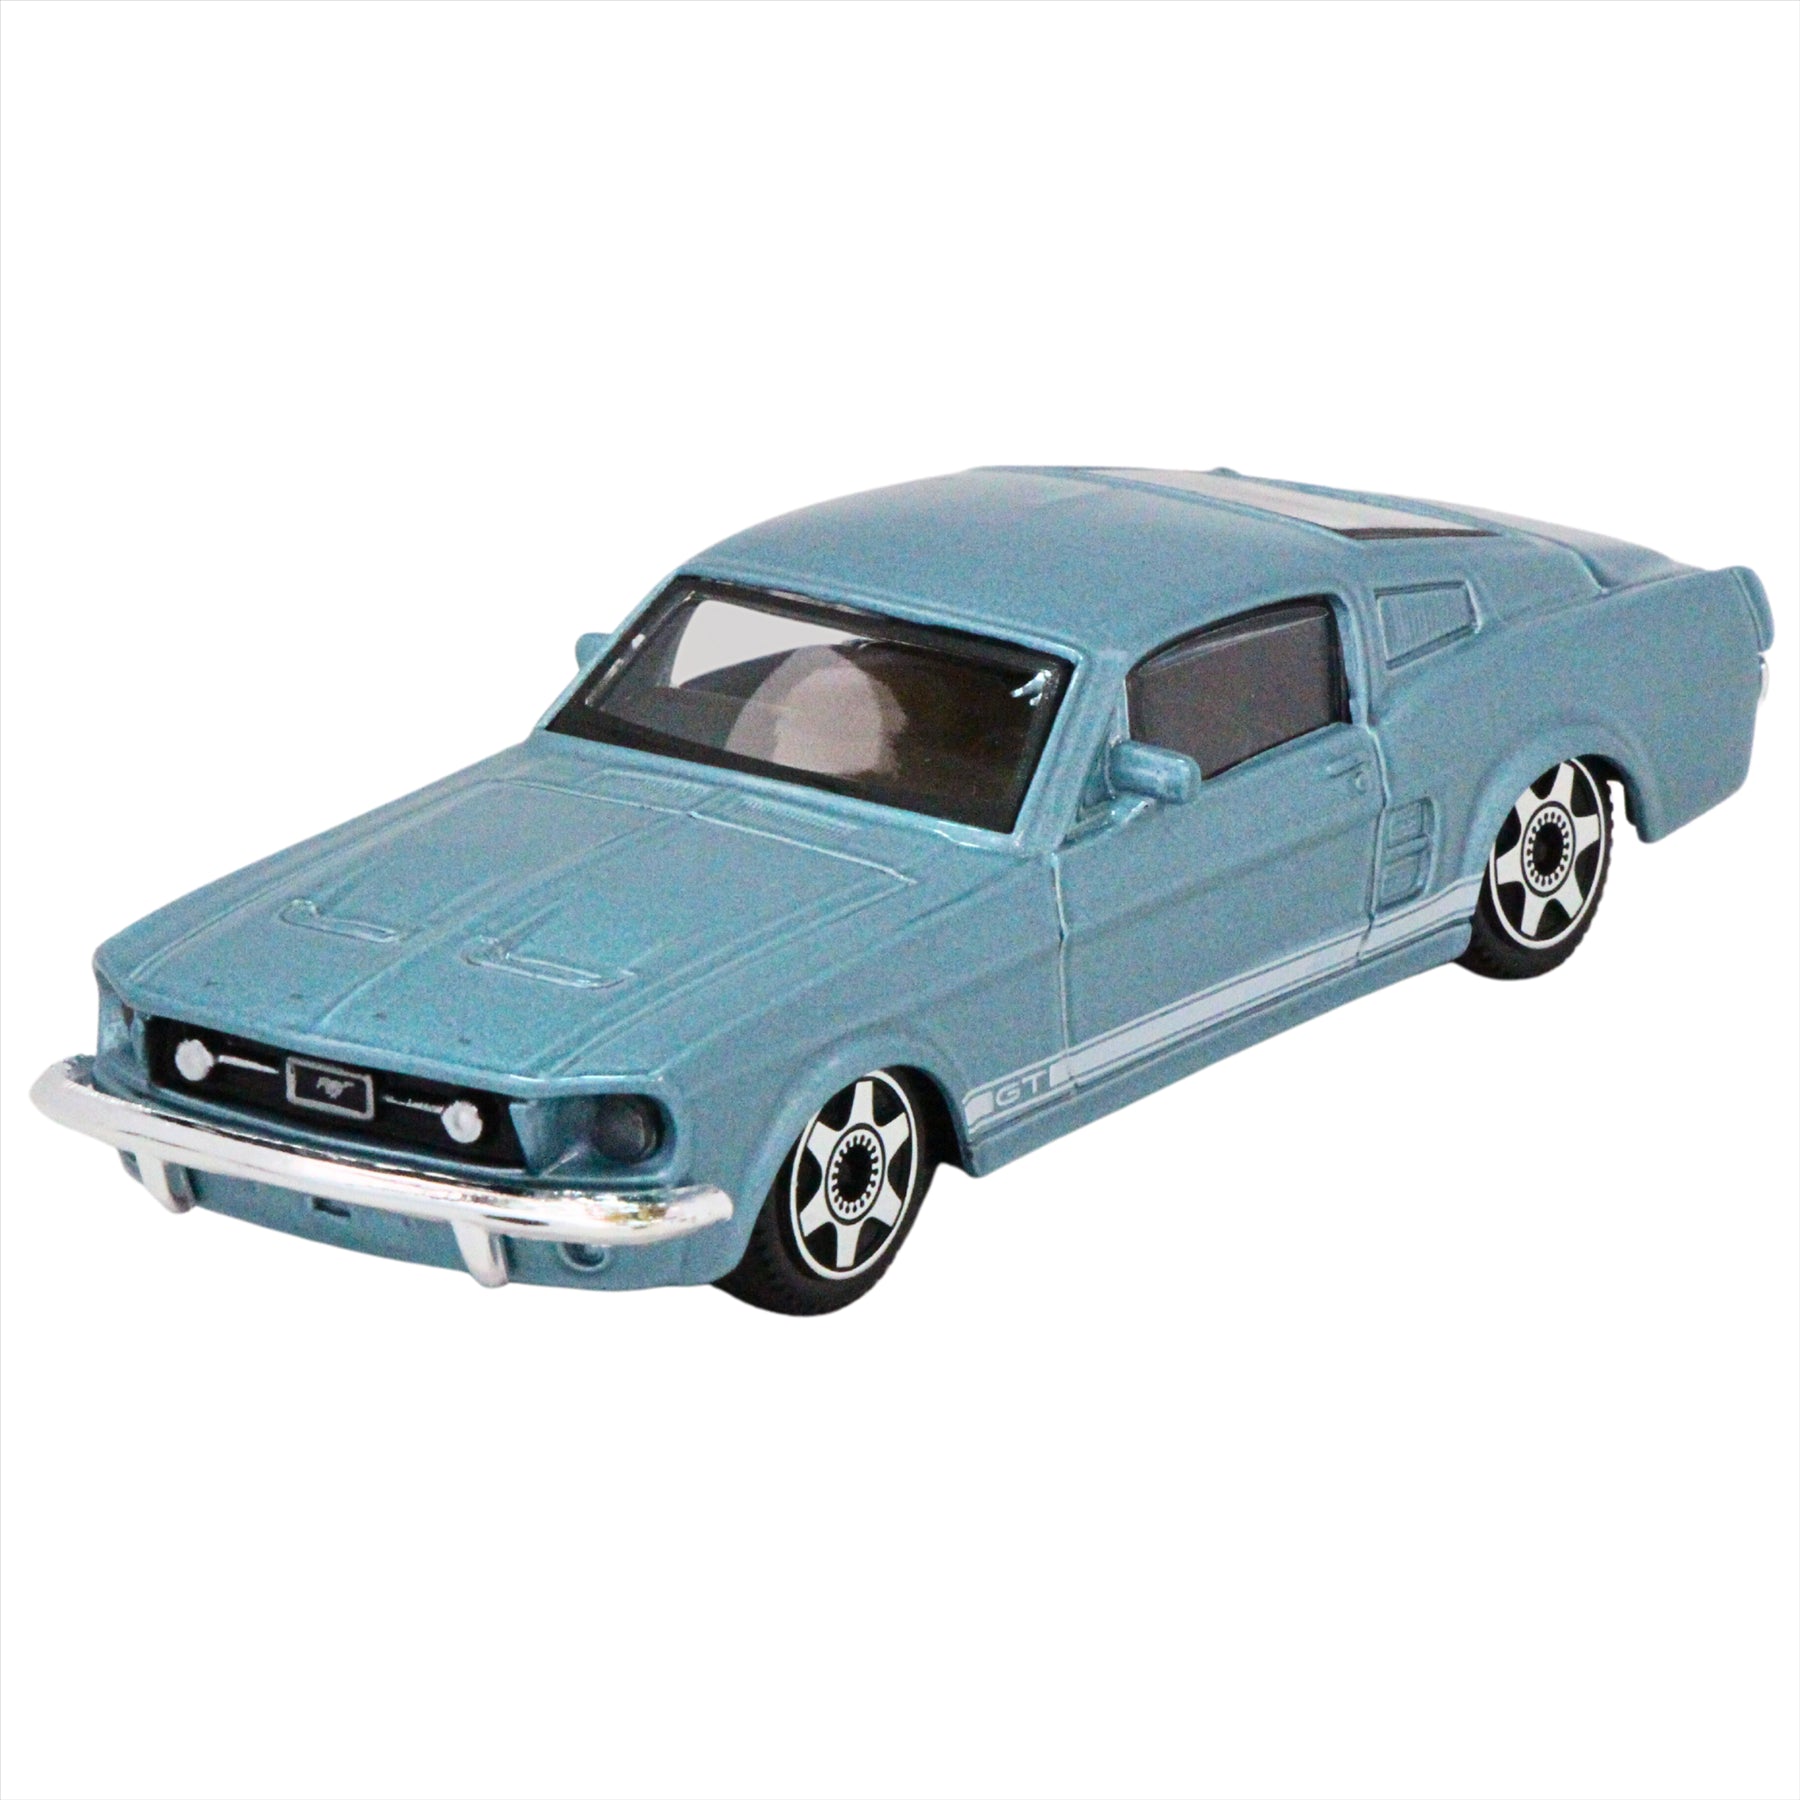 2020 Ford Mustang 1:18 Scale Diecast Model Display Cote dIvoire